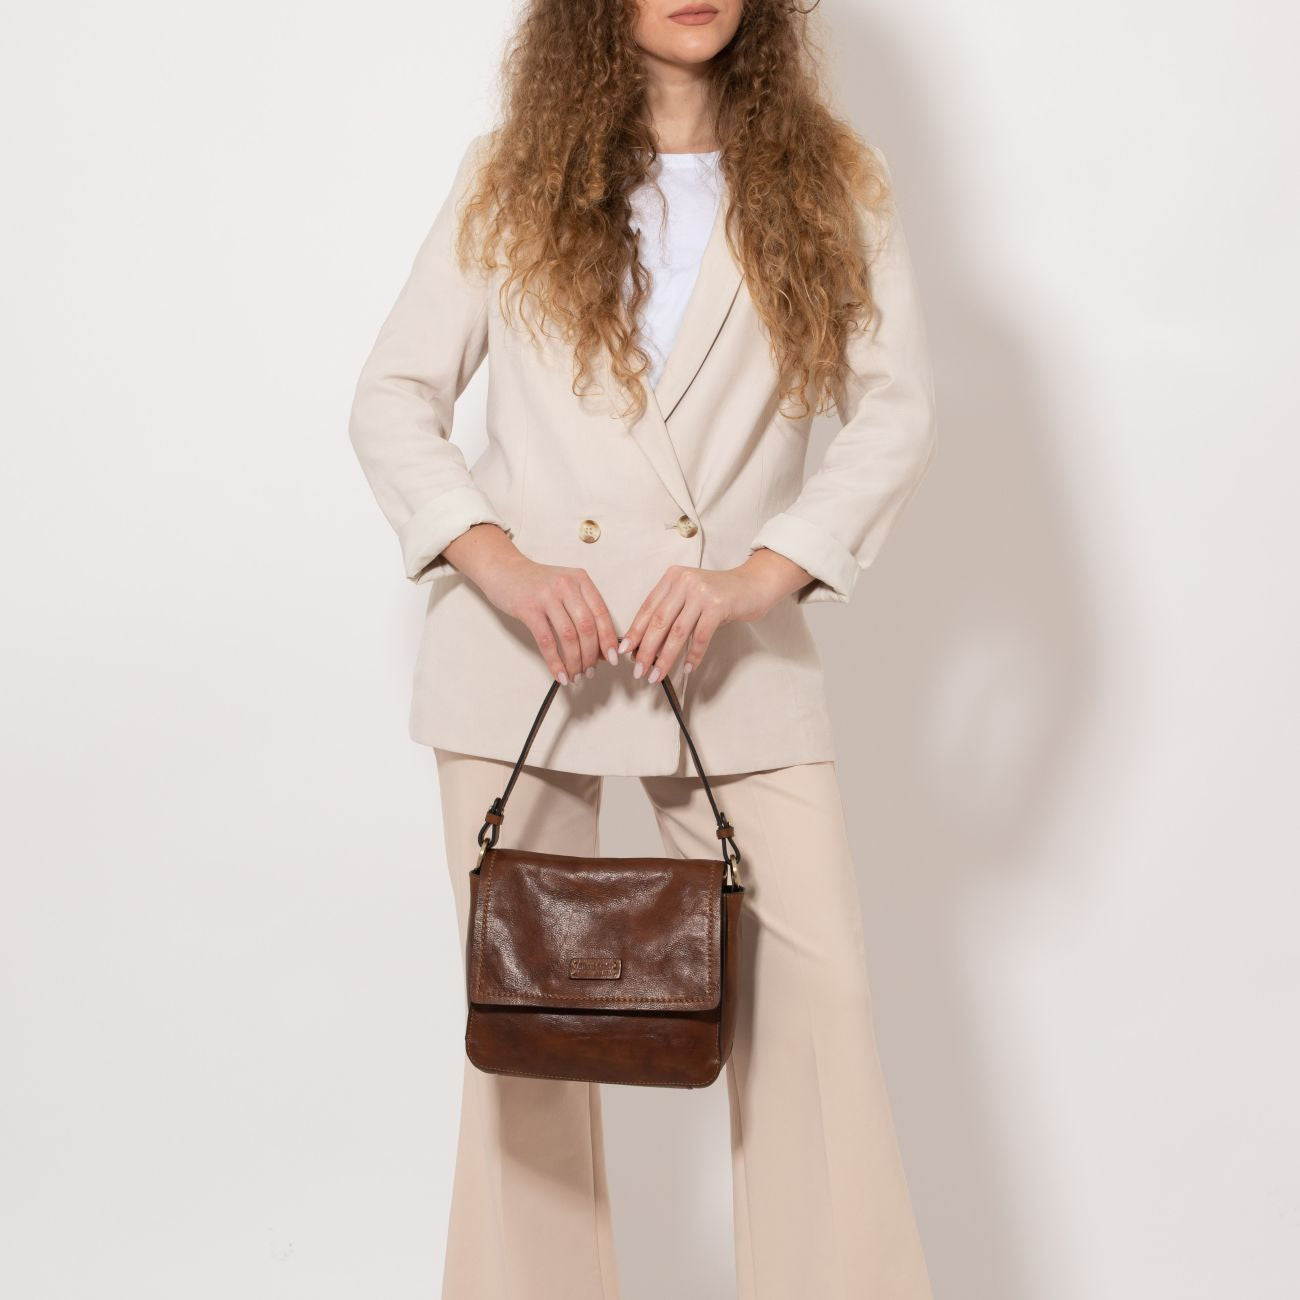 Annalisa Vegetable-Tanned Leather Shoulder Bag by Gianni Conti